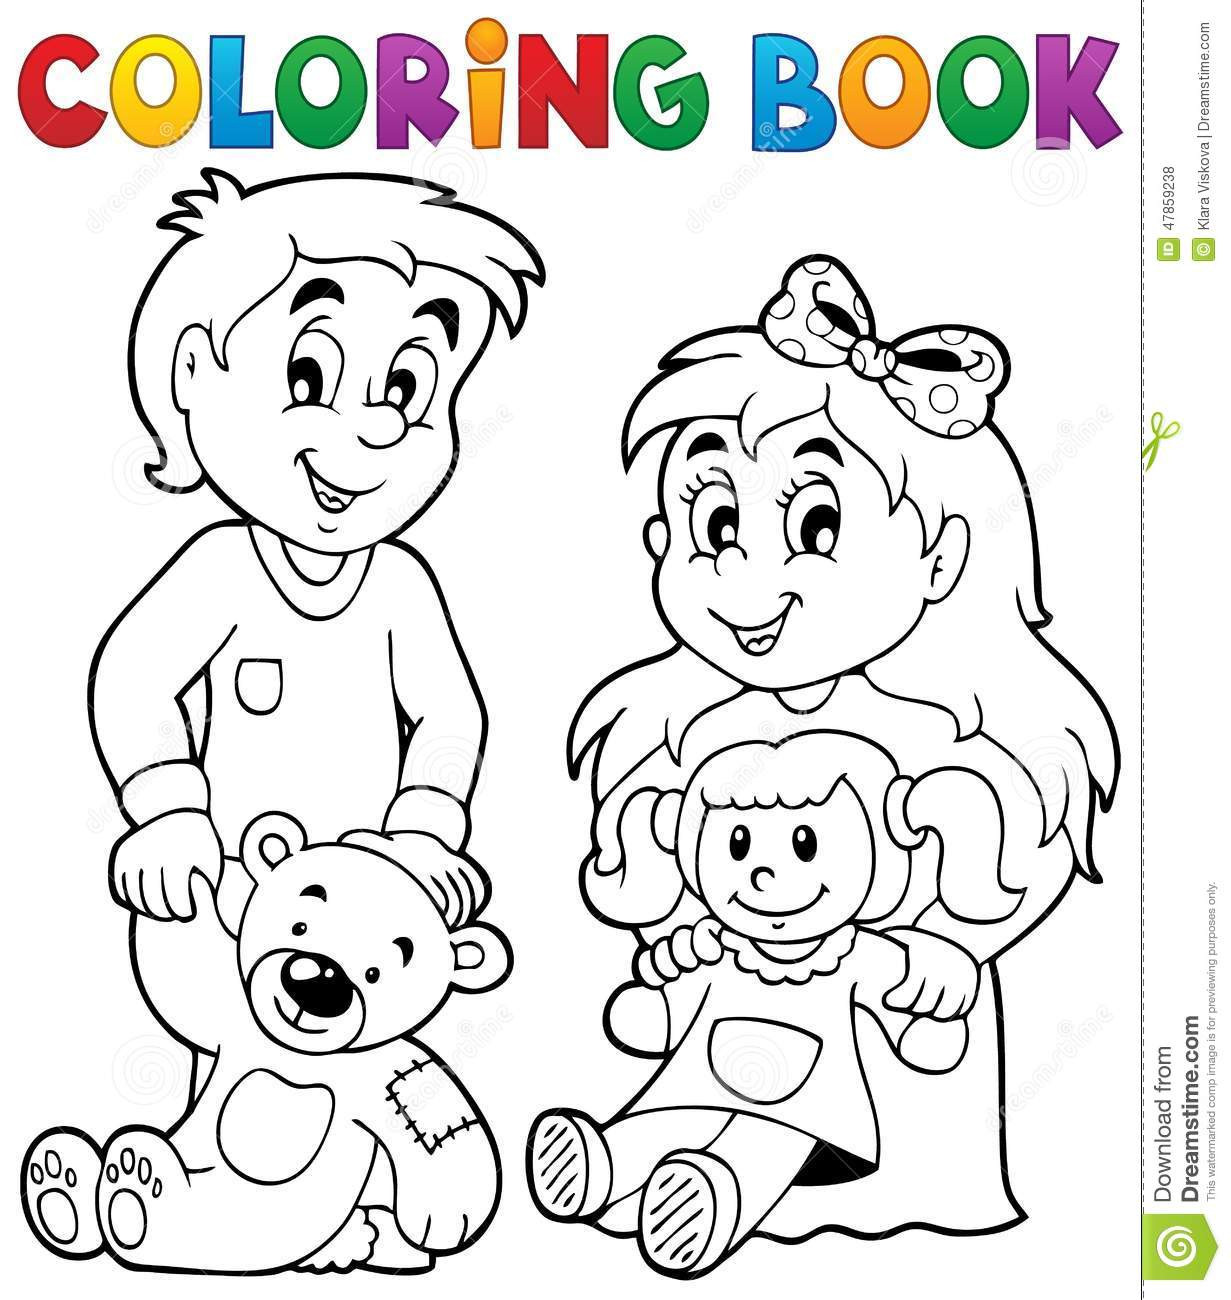 Coloring Book Toddler
 Coloring Book Children With Toys 1 Stock Vector Image